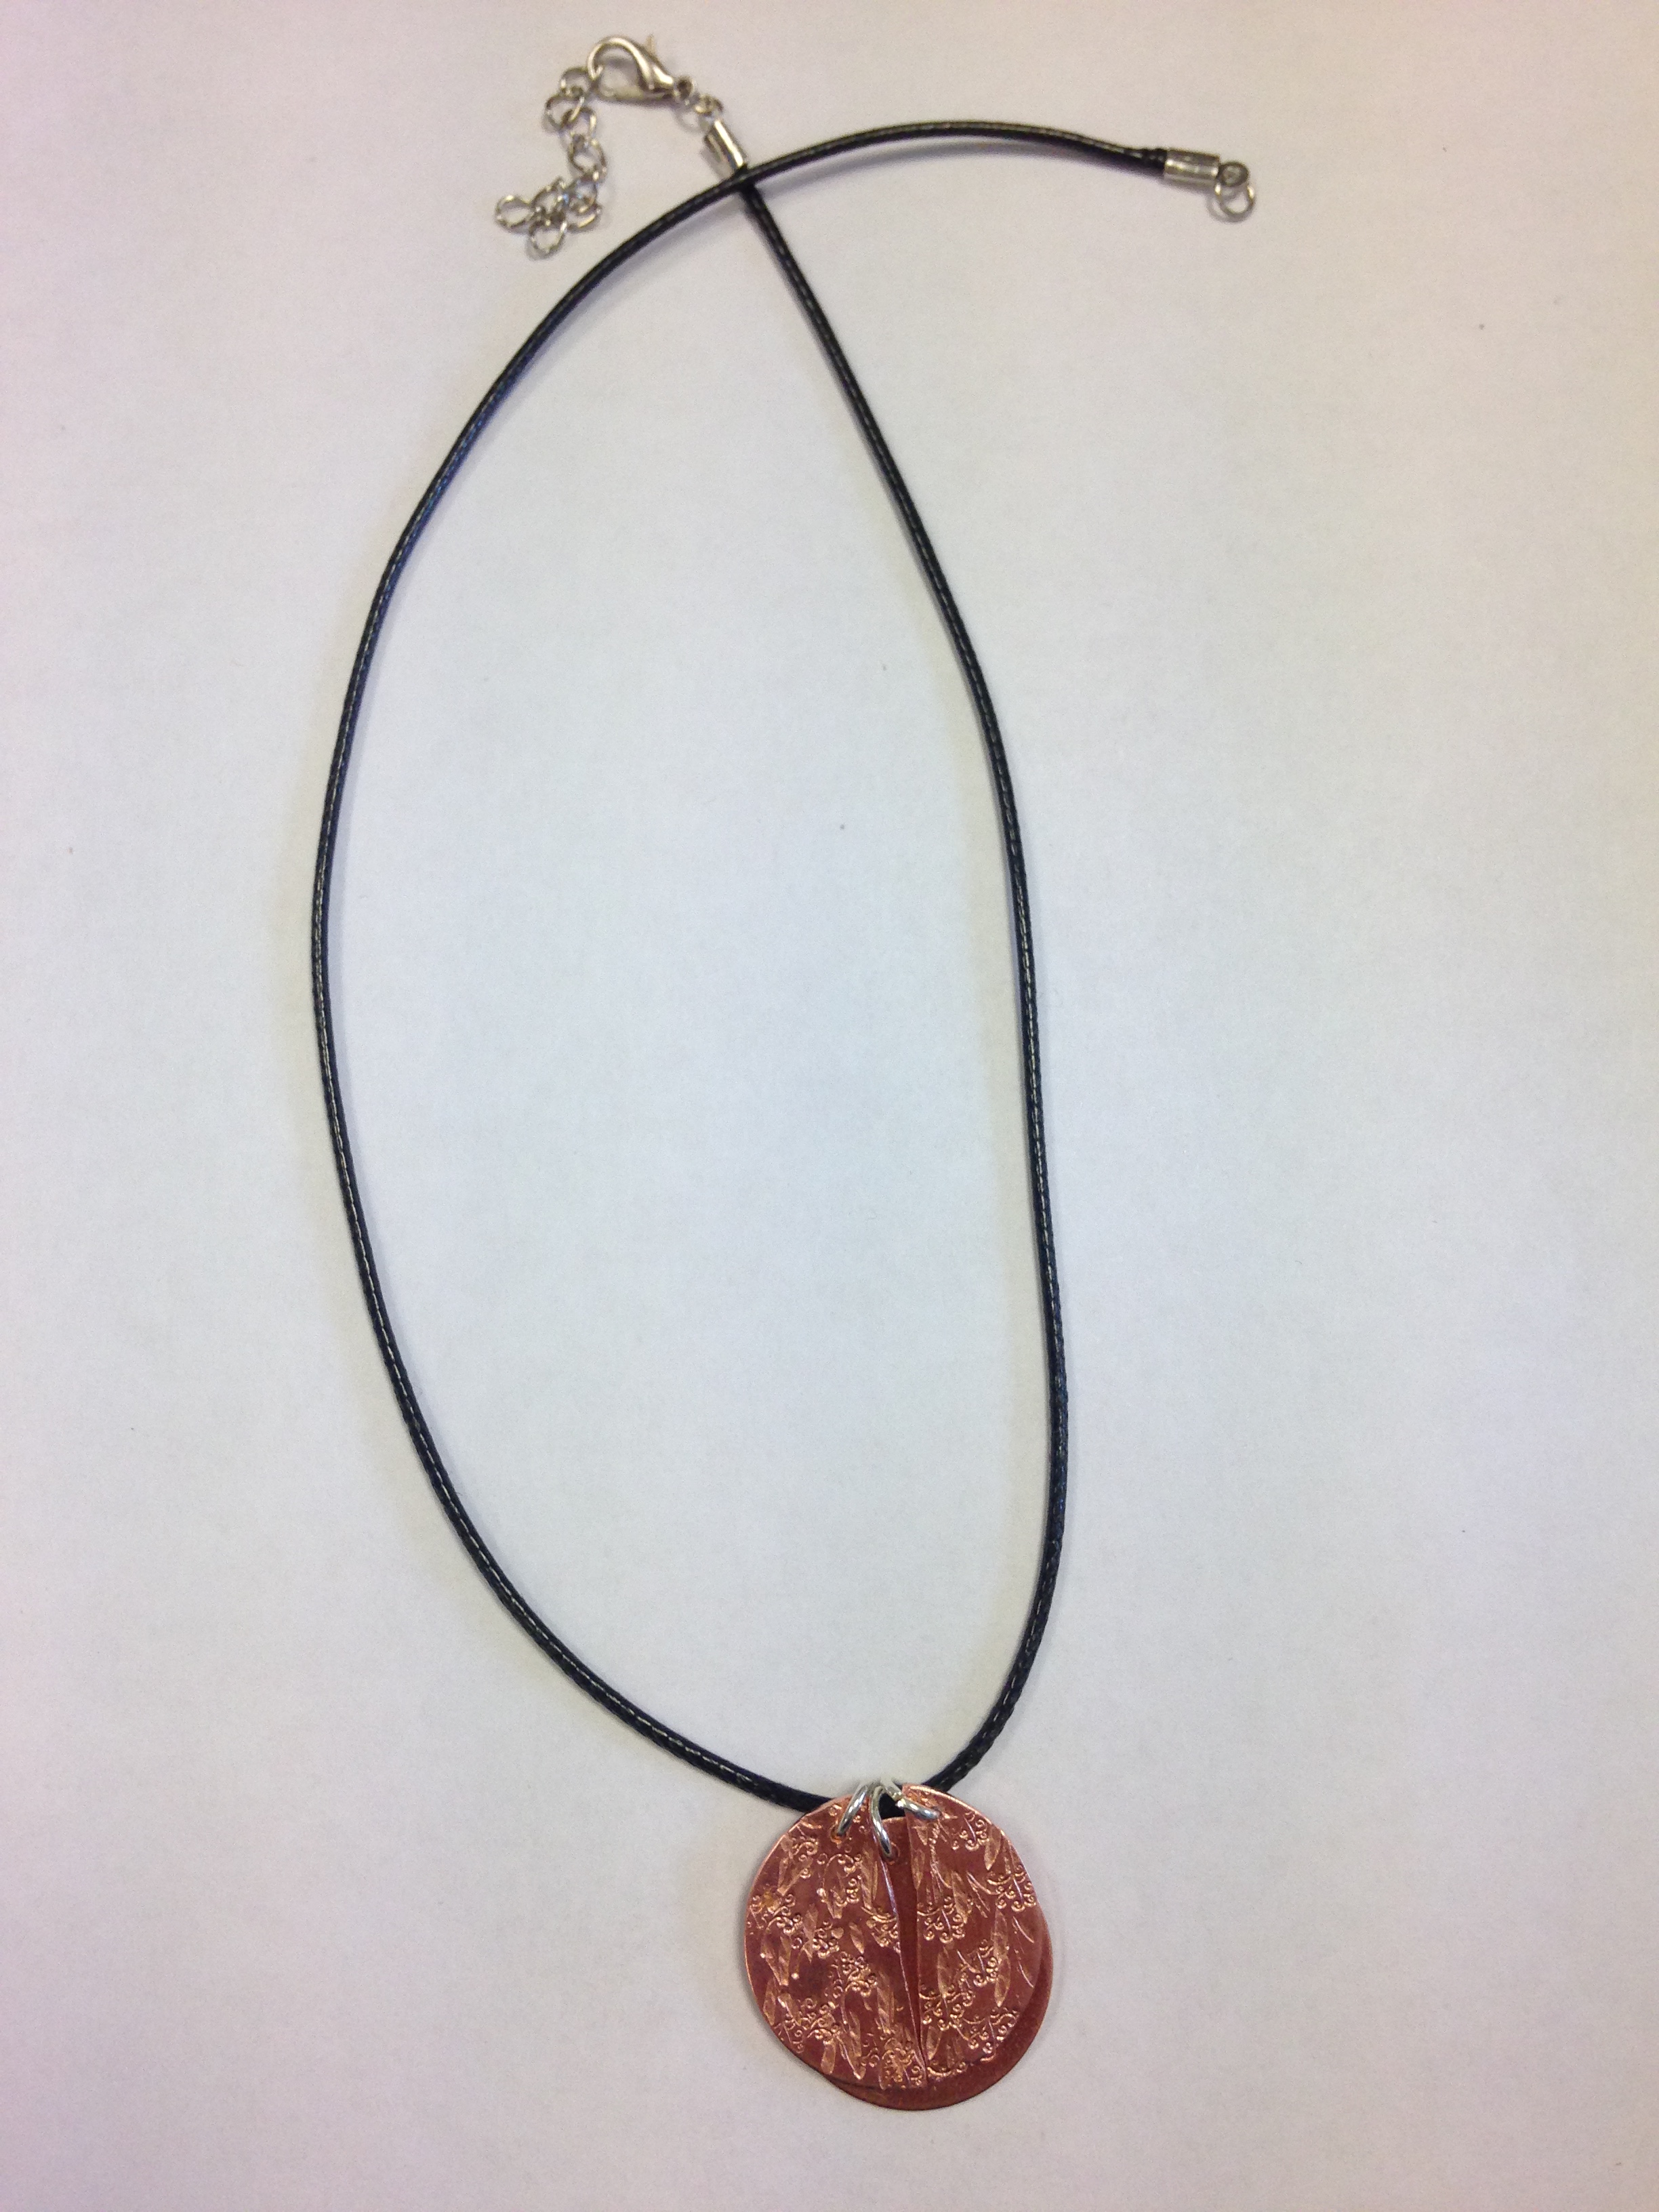 A necklace on whose copper disc a woman stamped a pattern.